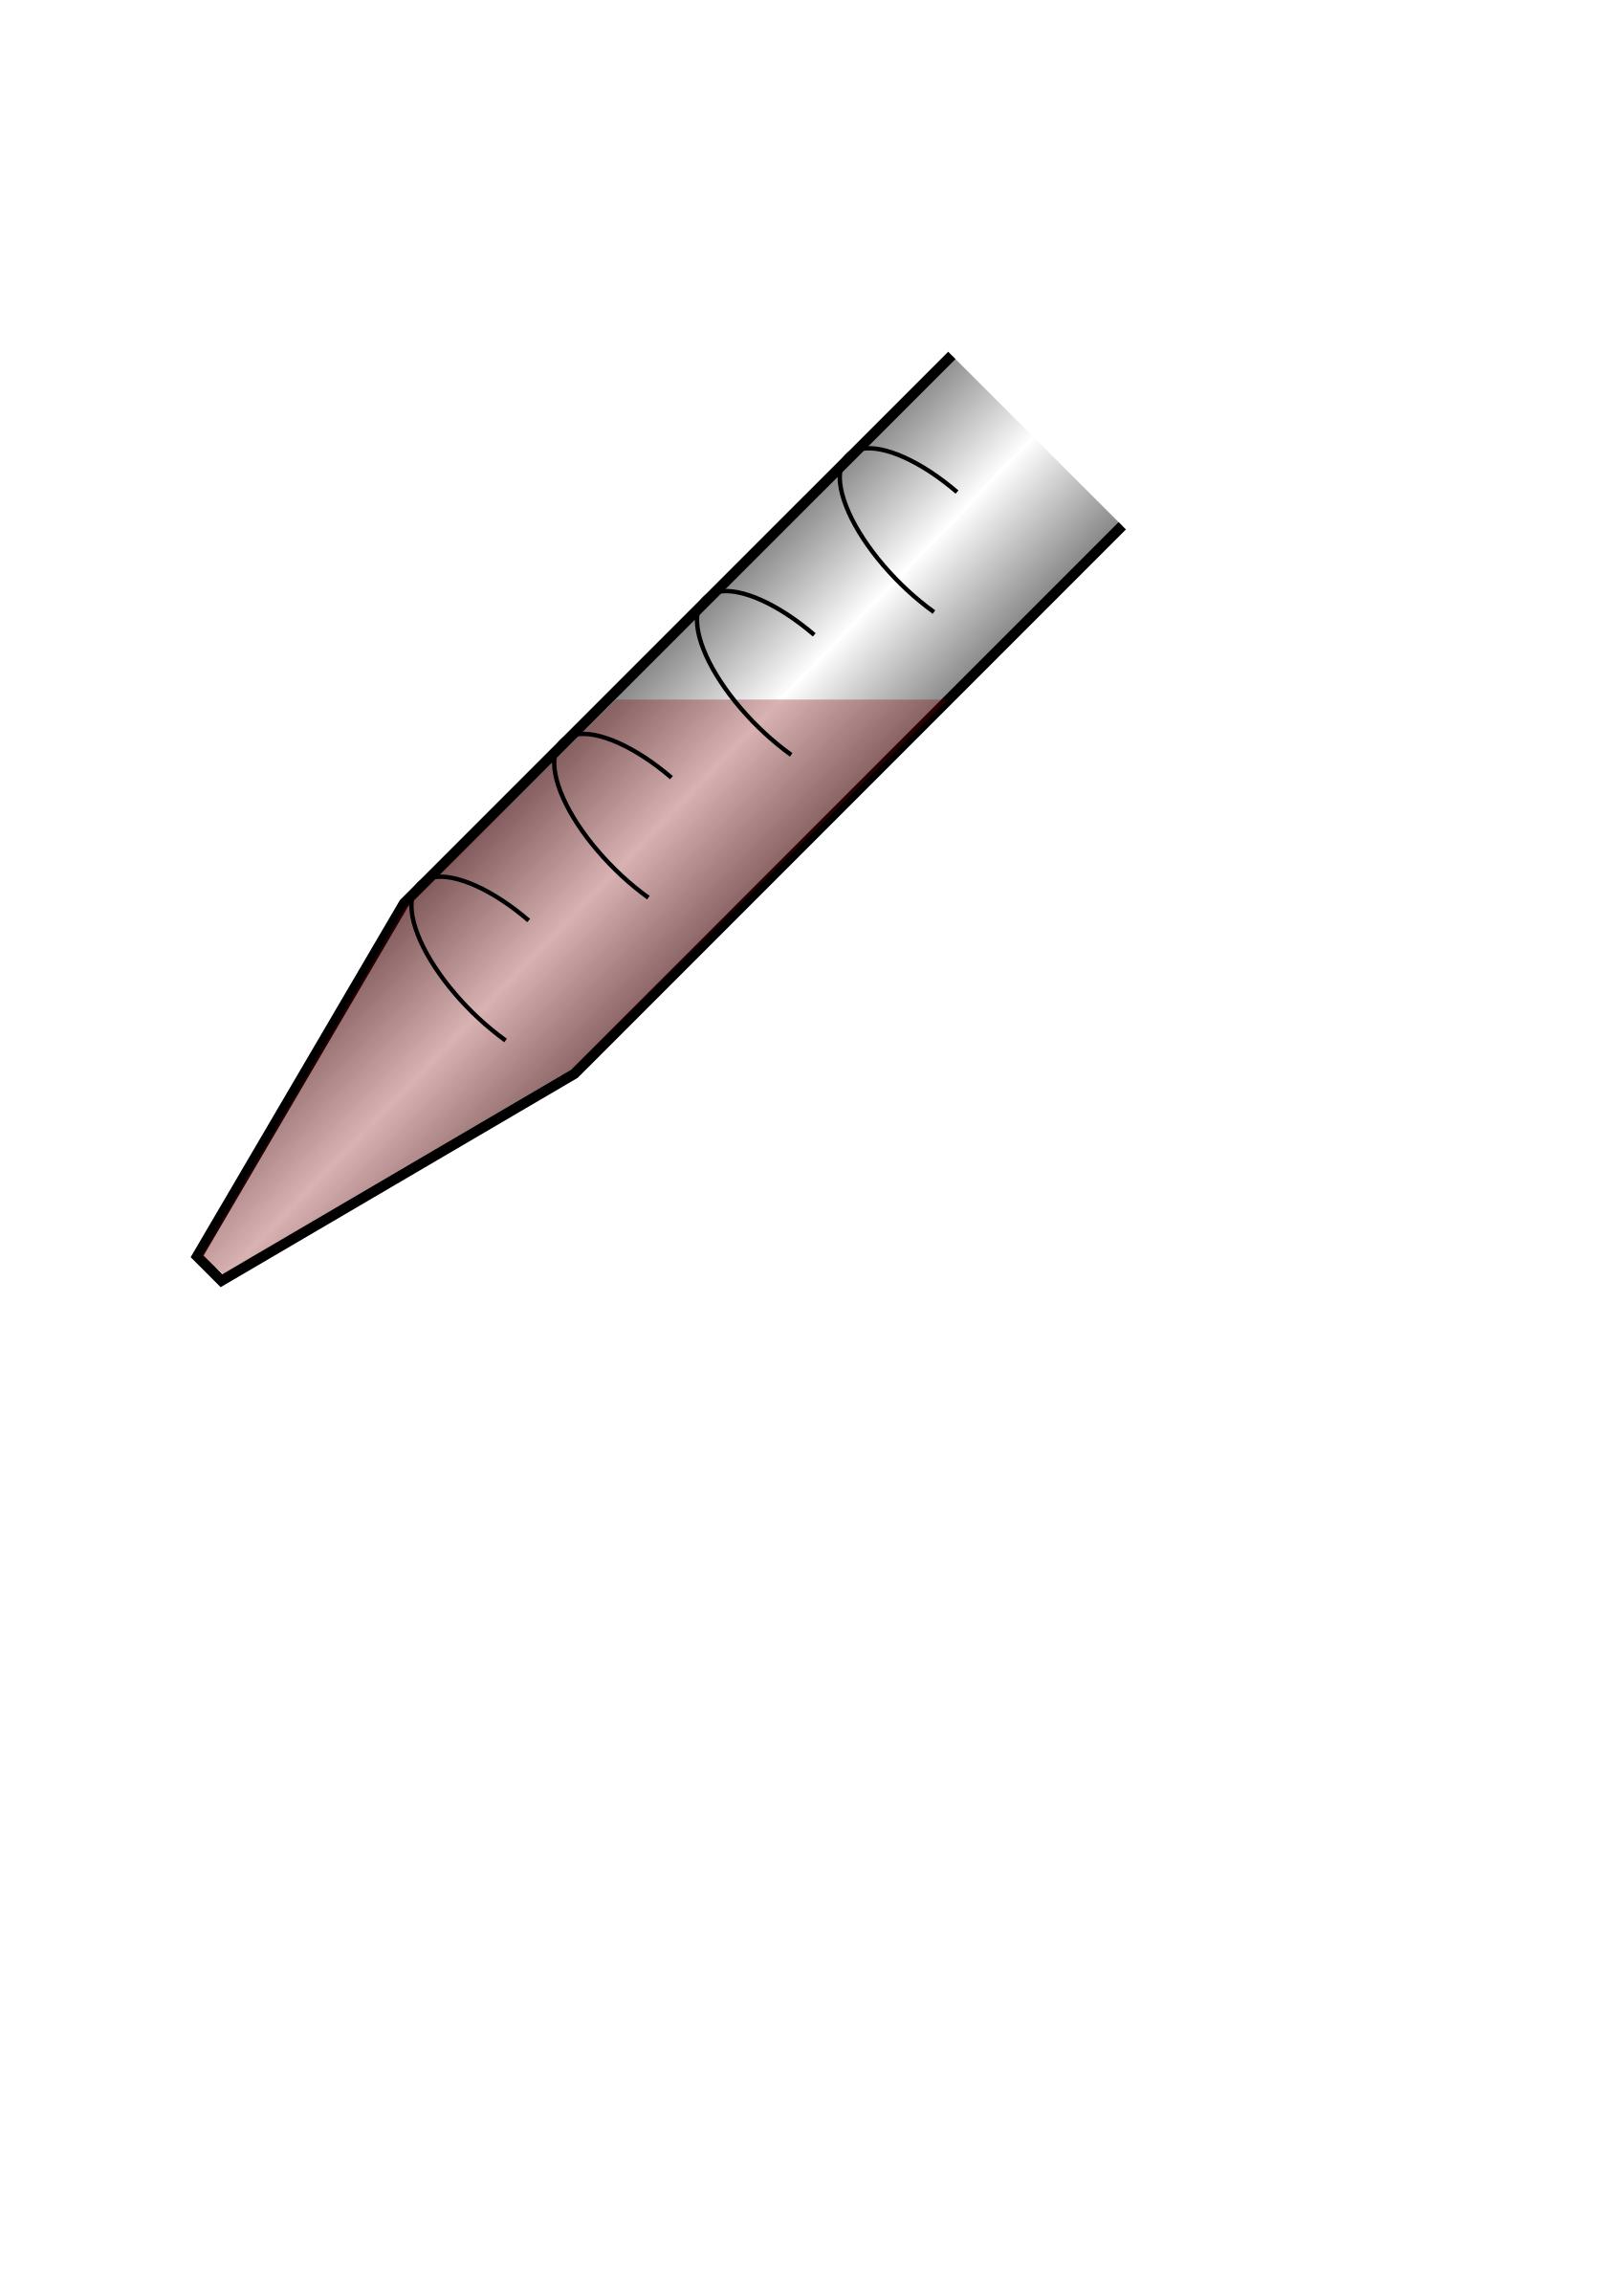 Pipette with Medium png